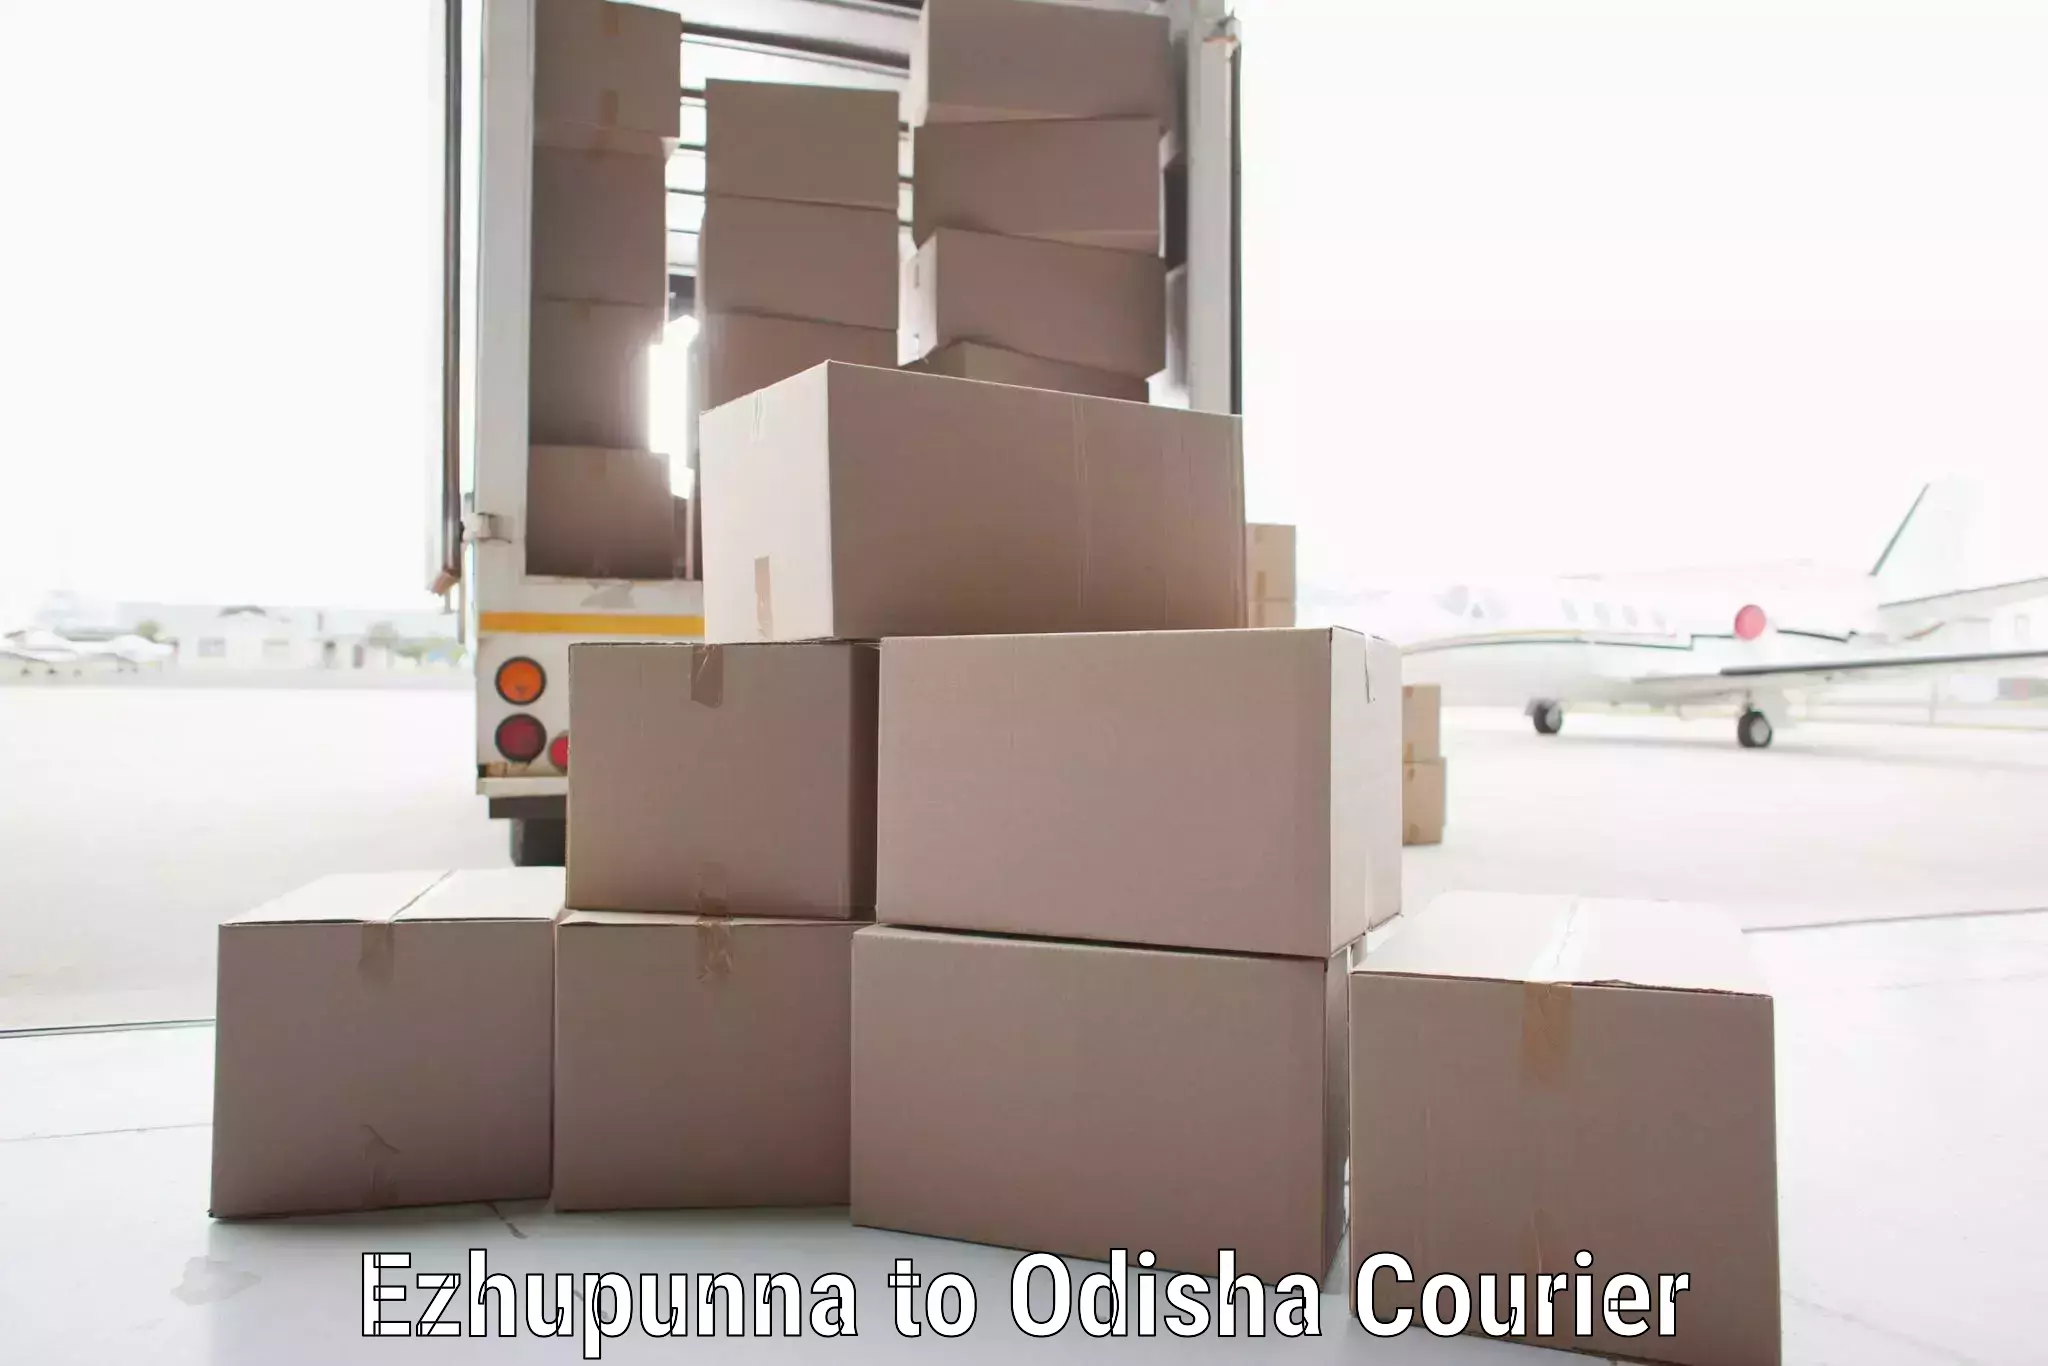 Personal courier services in Ezhupunna to Paradip Port